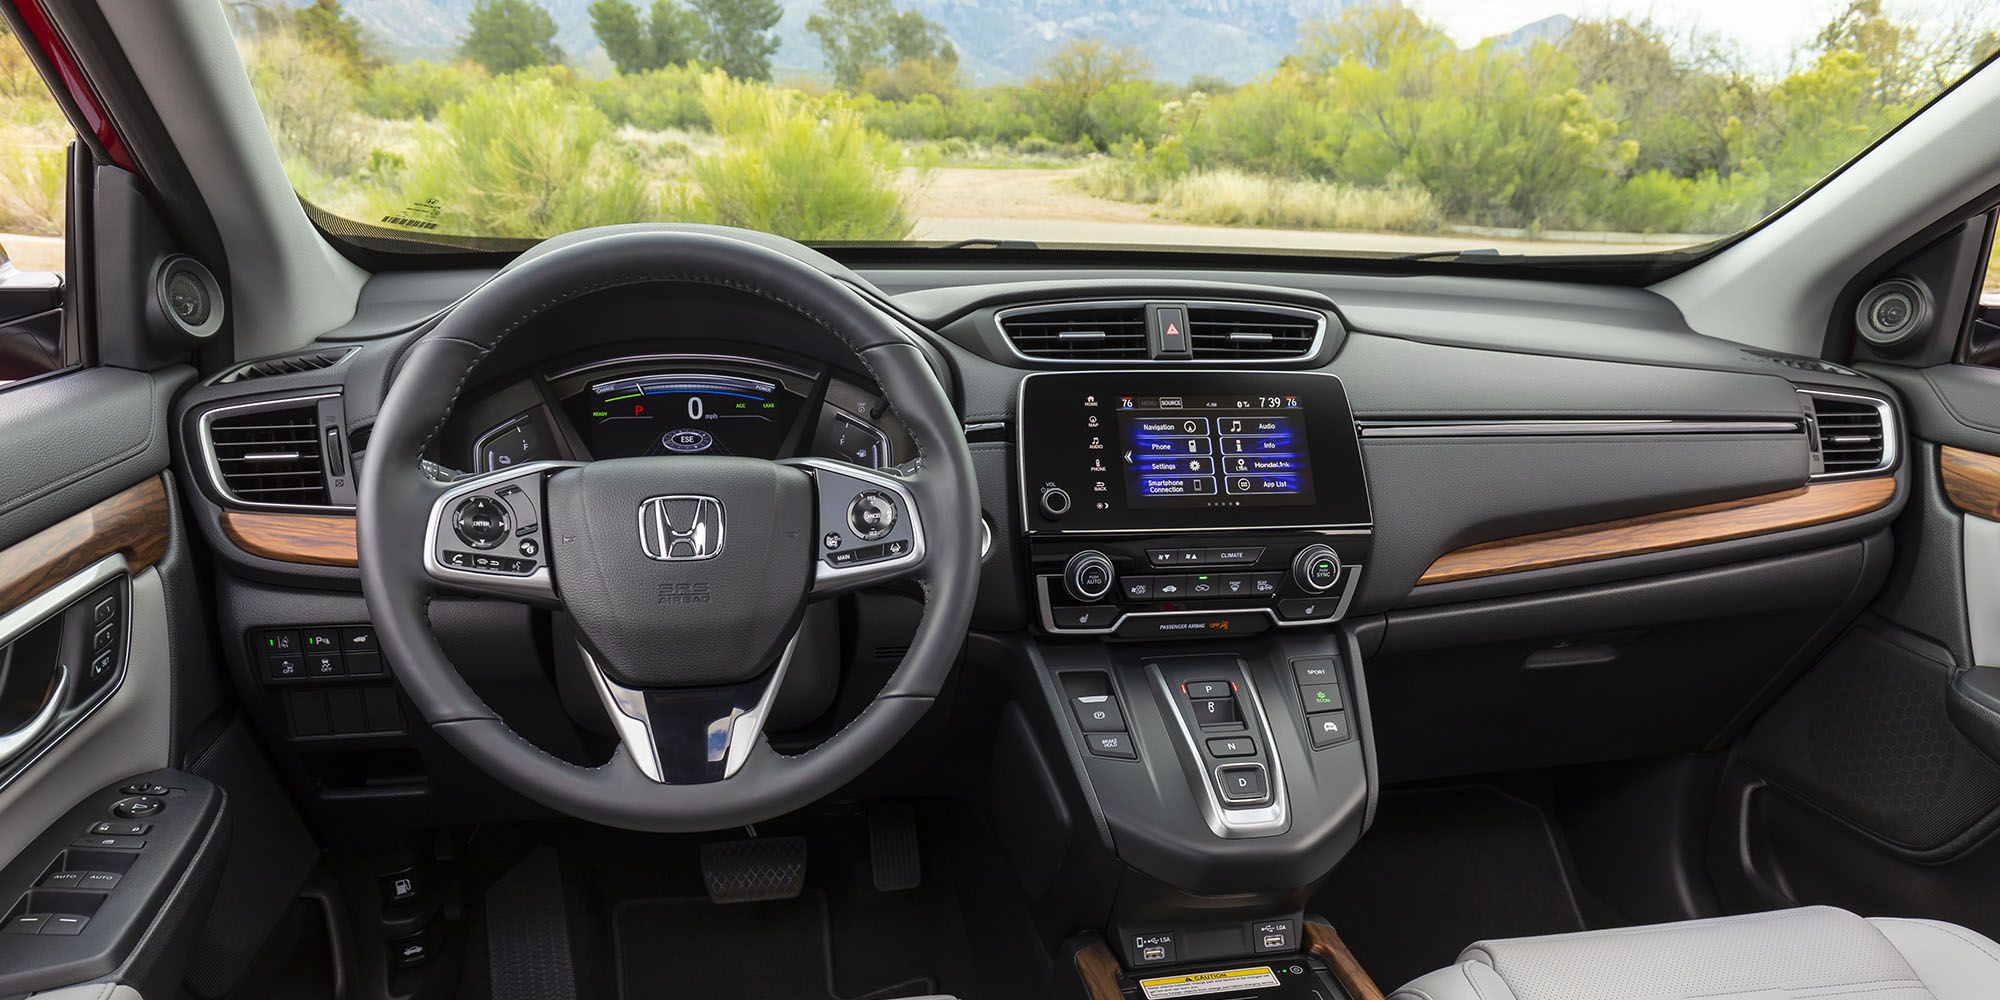 The interior of the CR-V, from the driver's seat